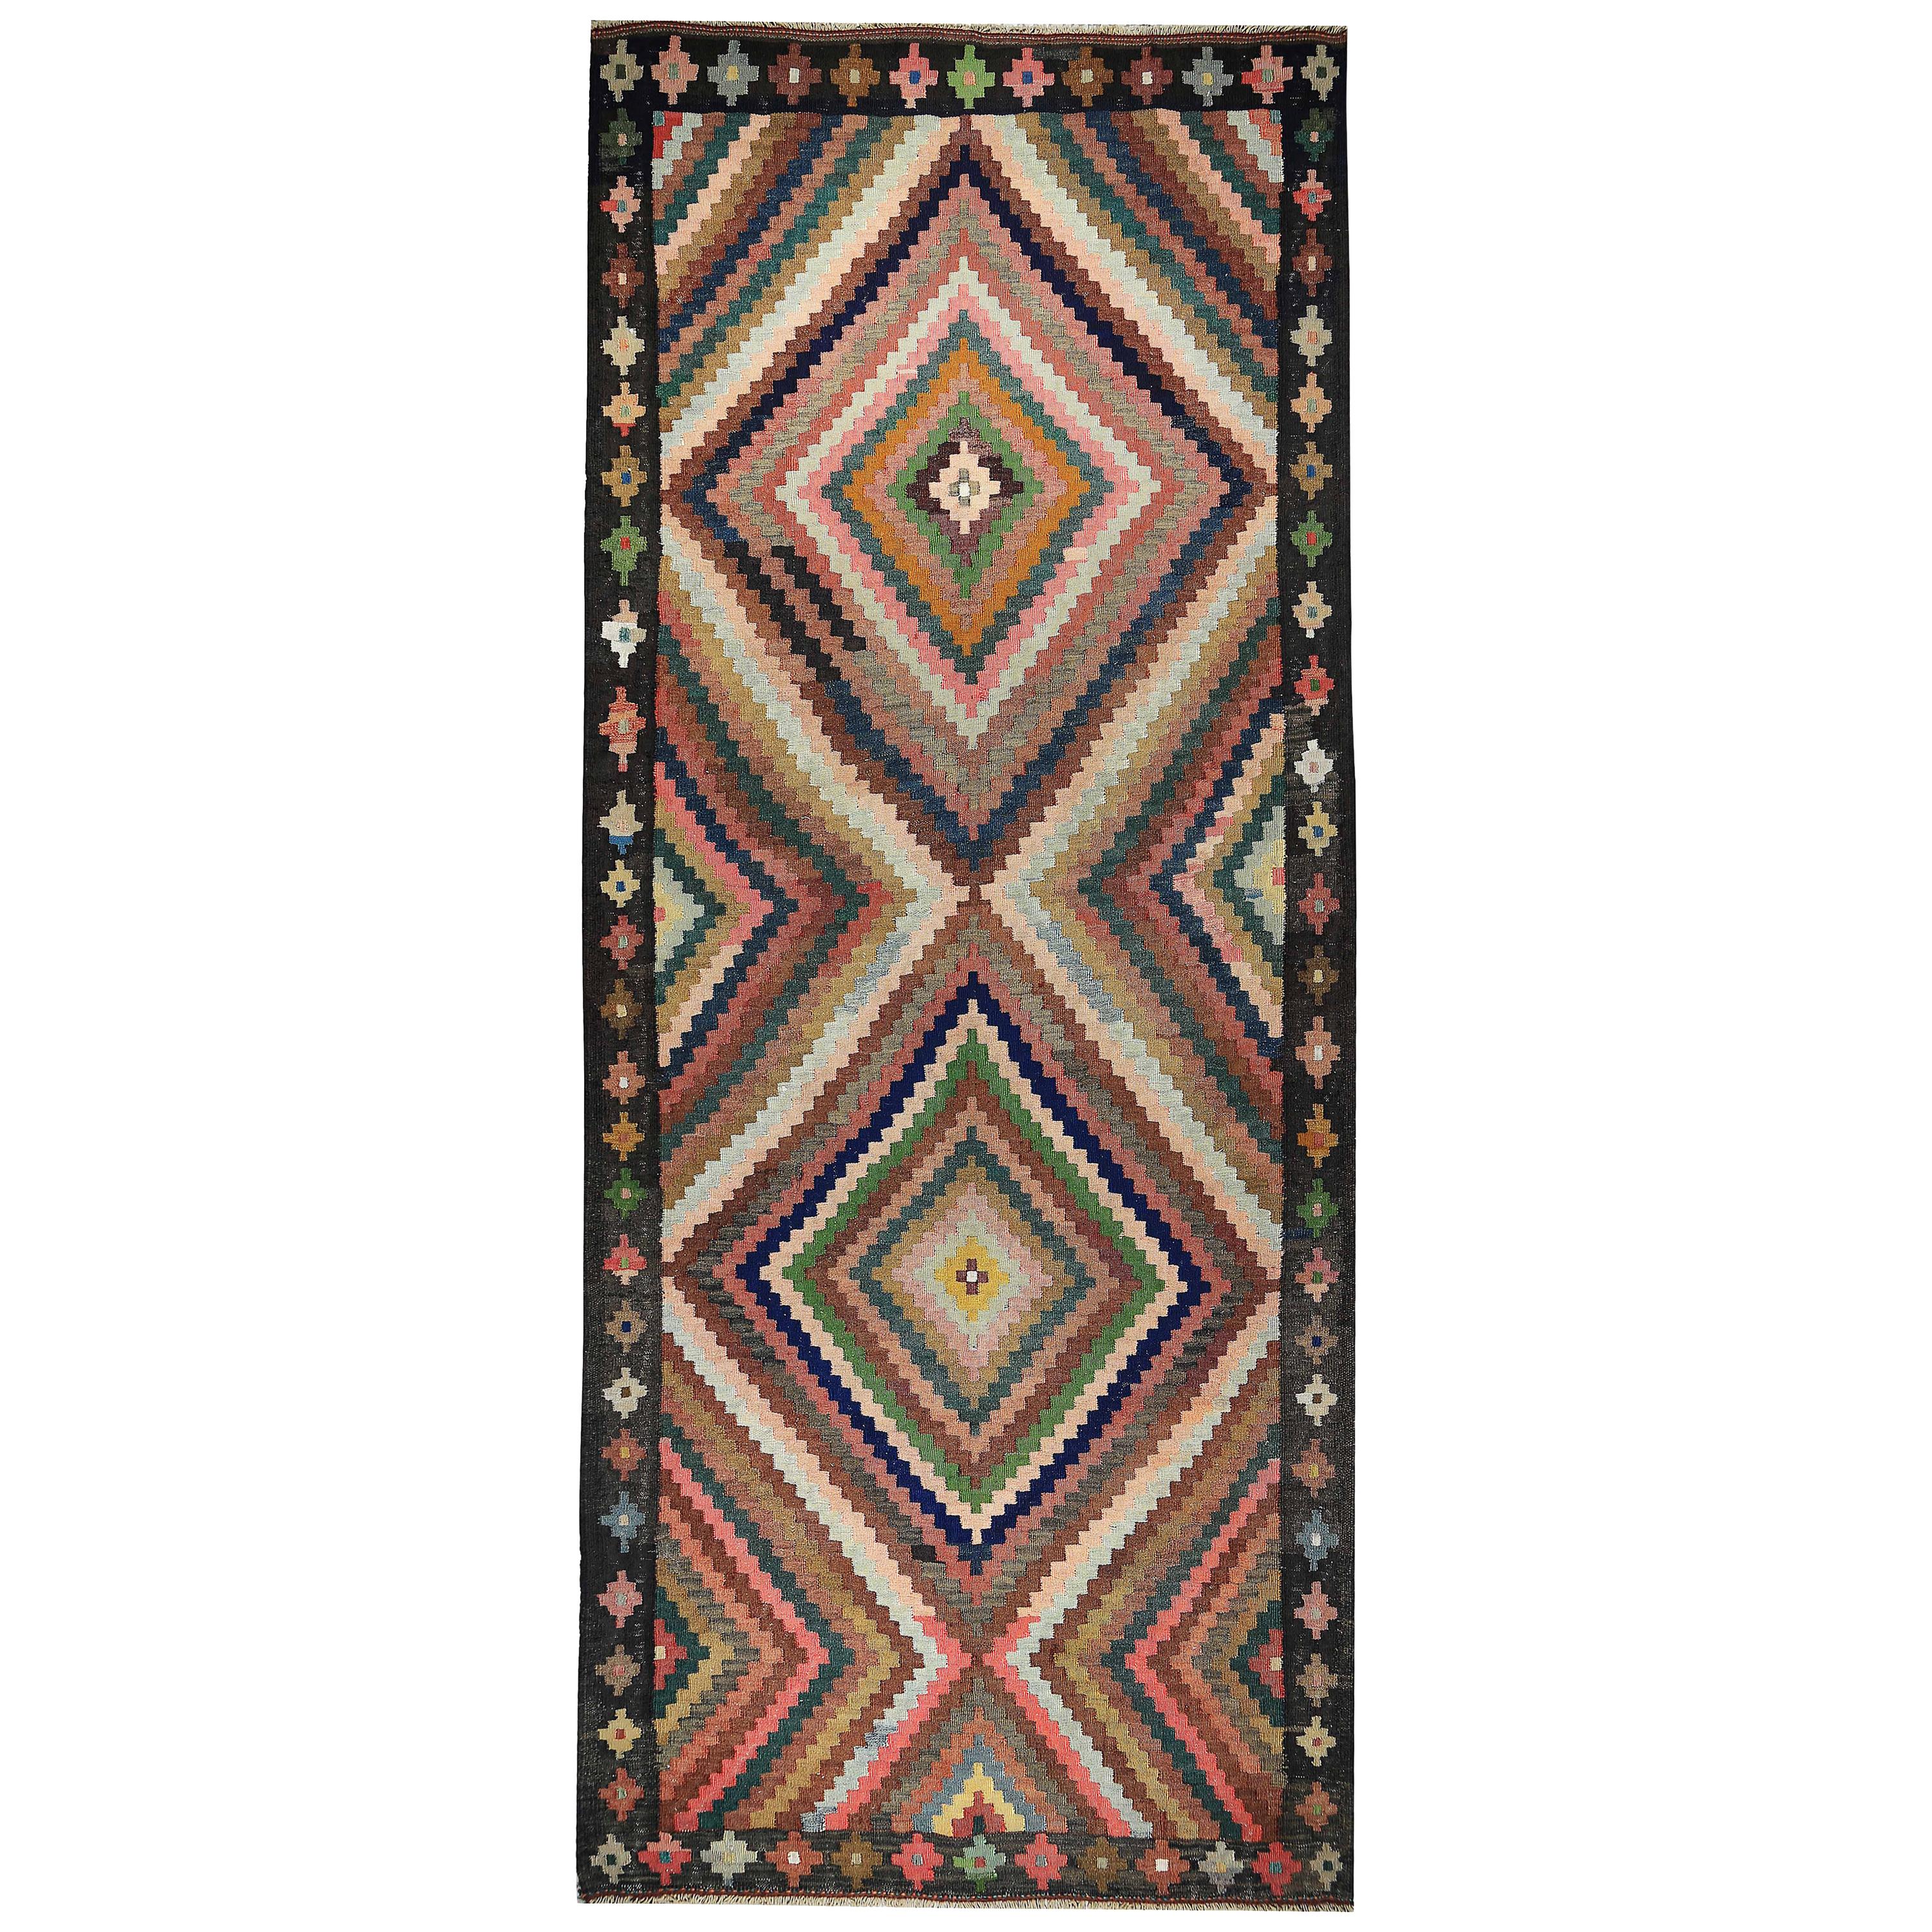 Turkish Kilim Runner Rug with Colorful Tribal Medallions and Patterns For Sale